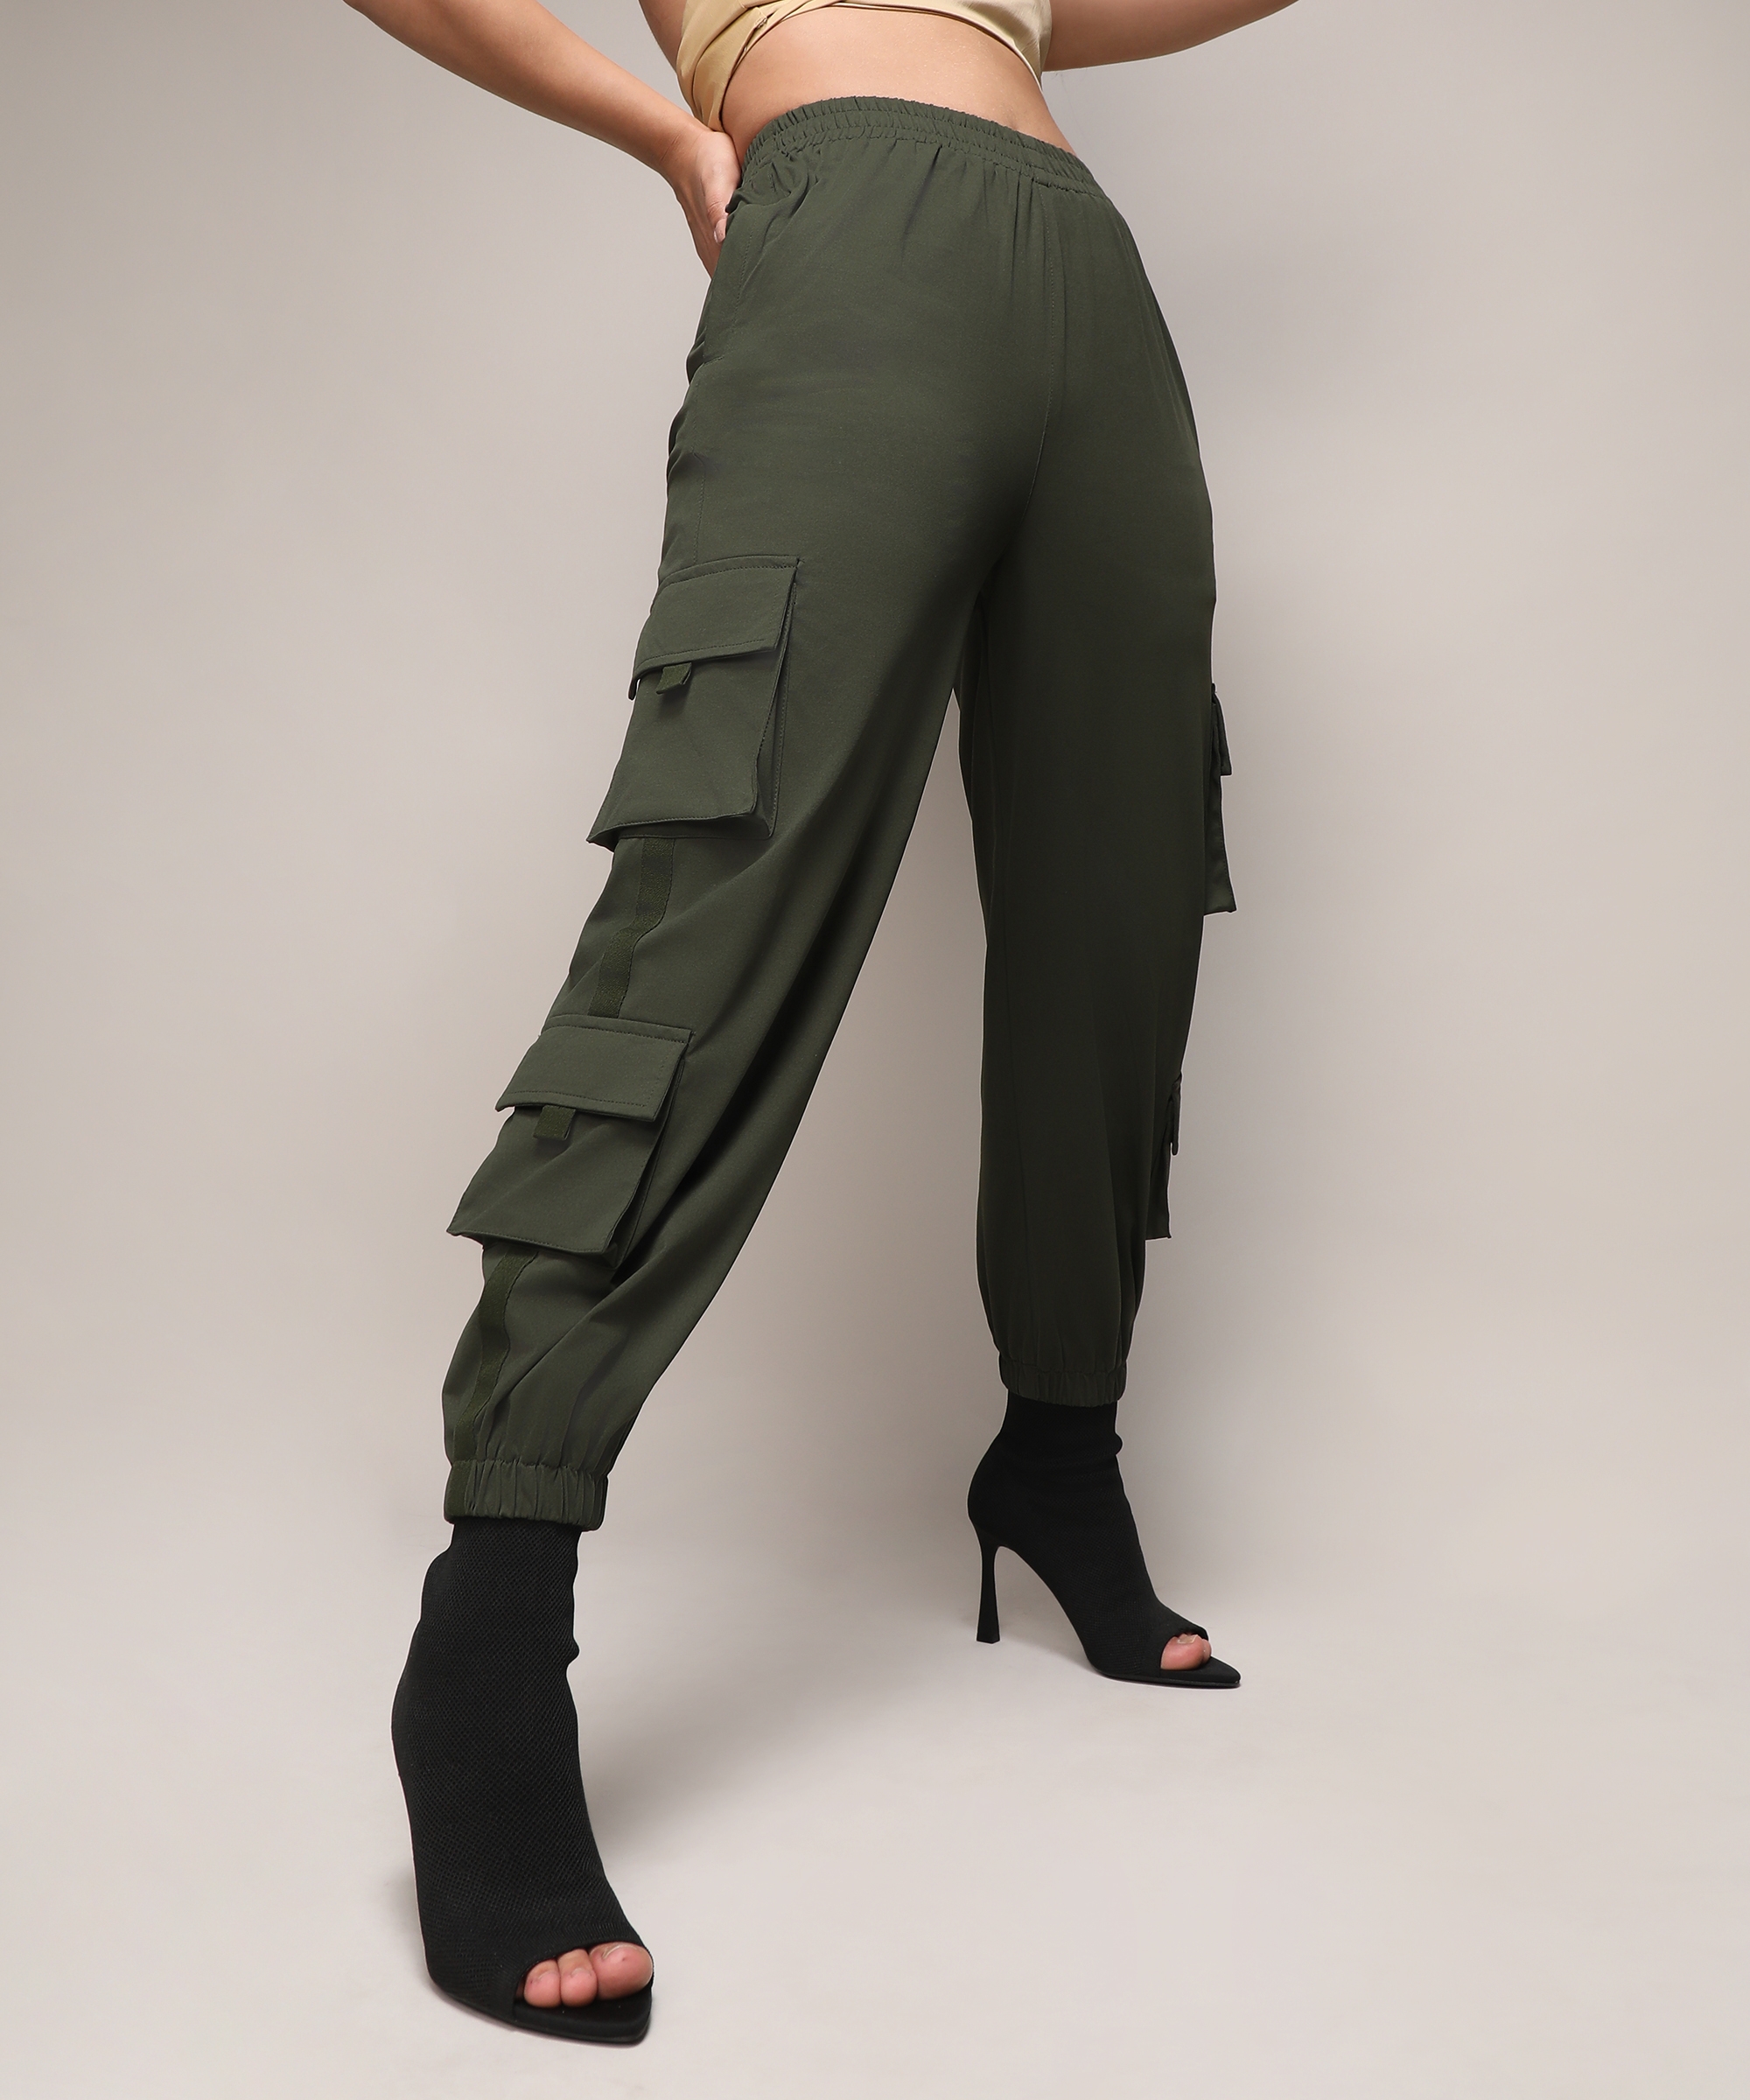 CAMPUS SUTRA | Women's Forest Green Solid Cargos